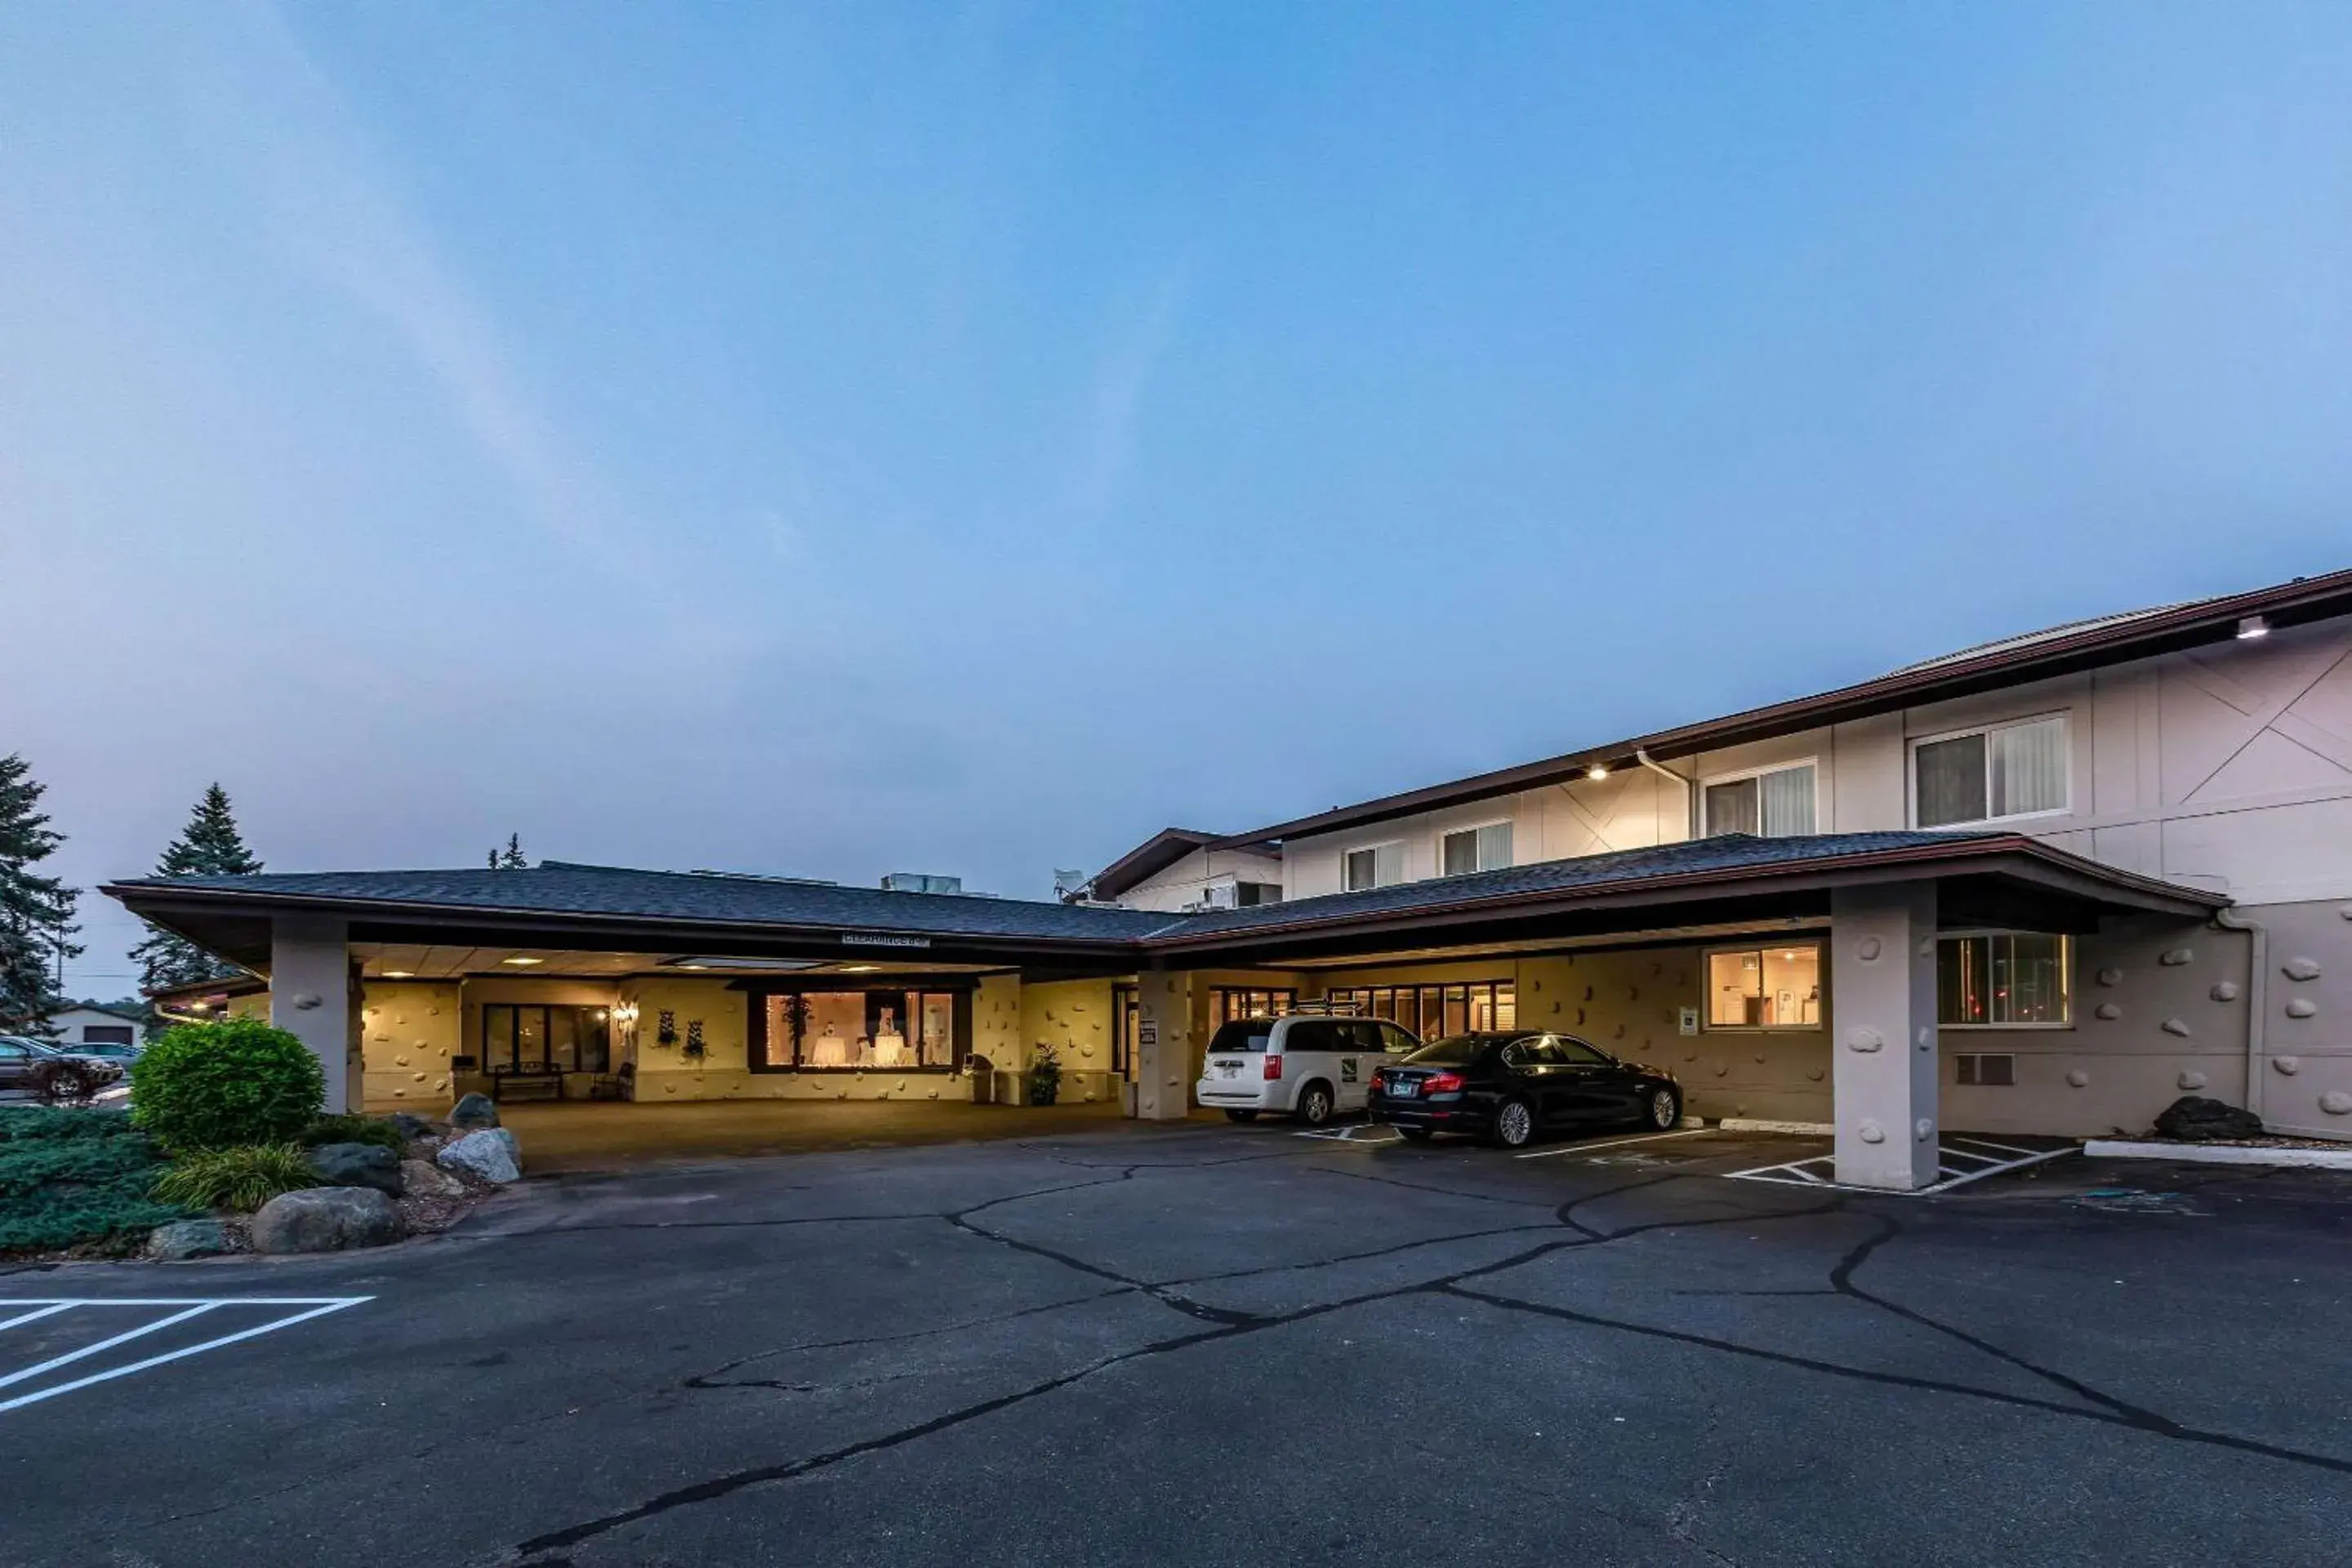 Other, Property Building in Quality Inn Wausau